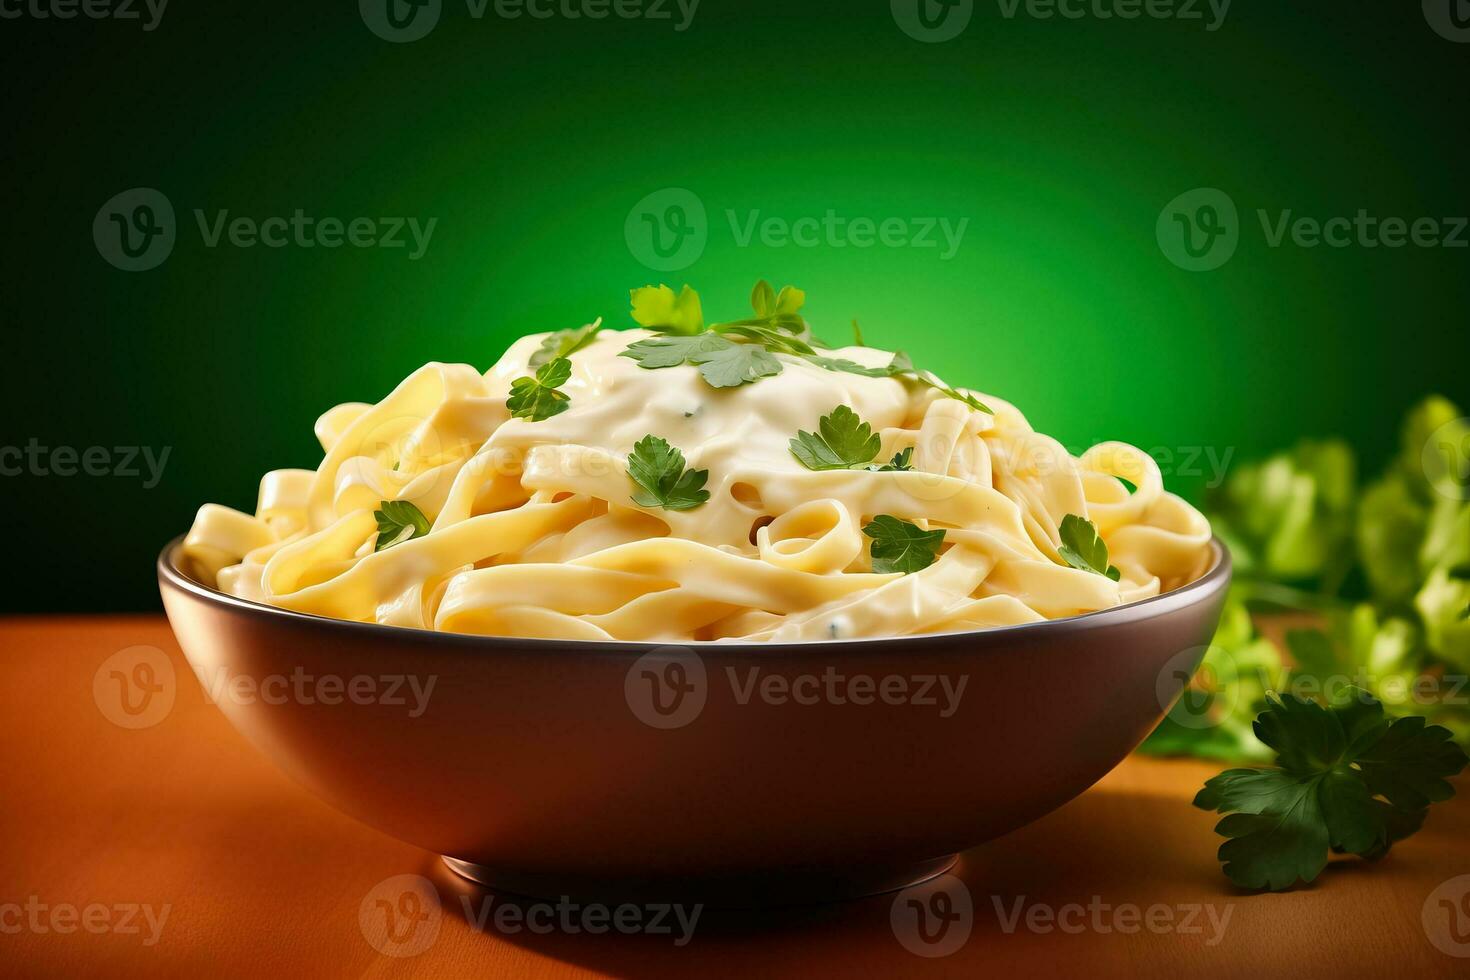 A mouth-watering image of a steaming bowl of creamy fettuccine Alfredo garnished with fresh parsley set against a warm gradient background photo